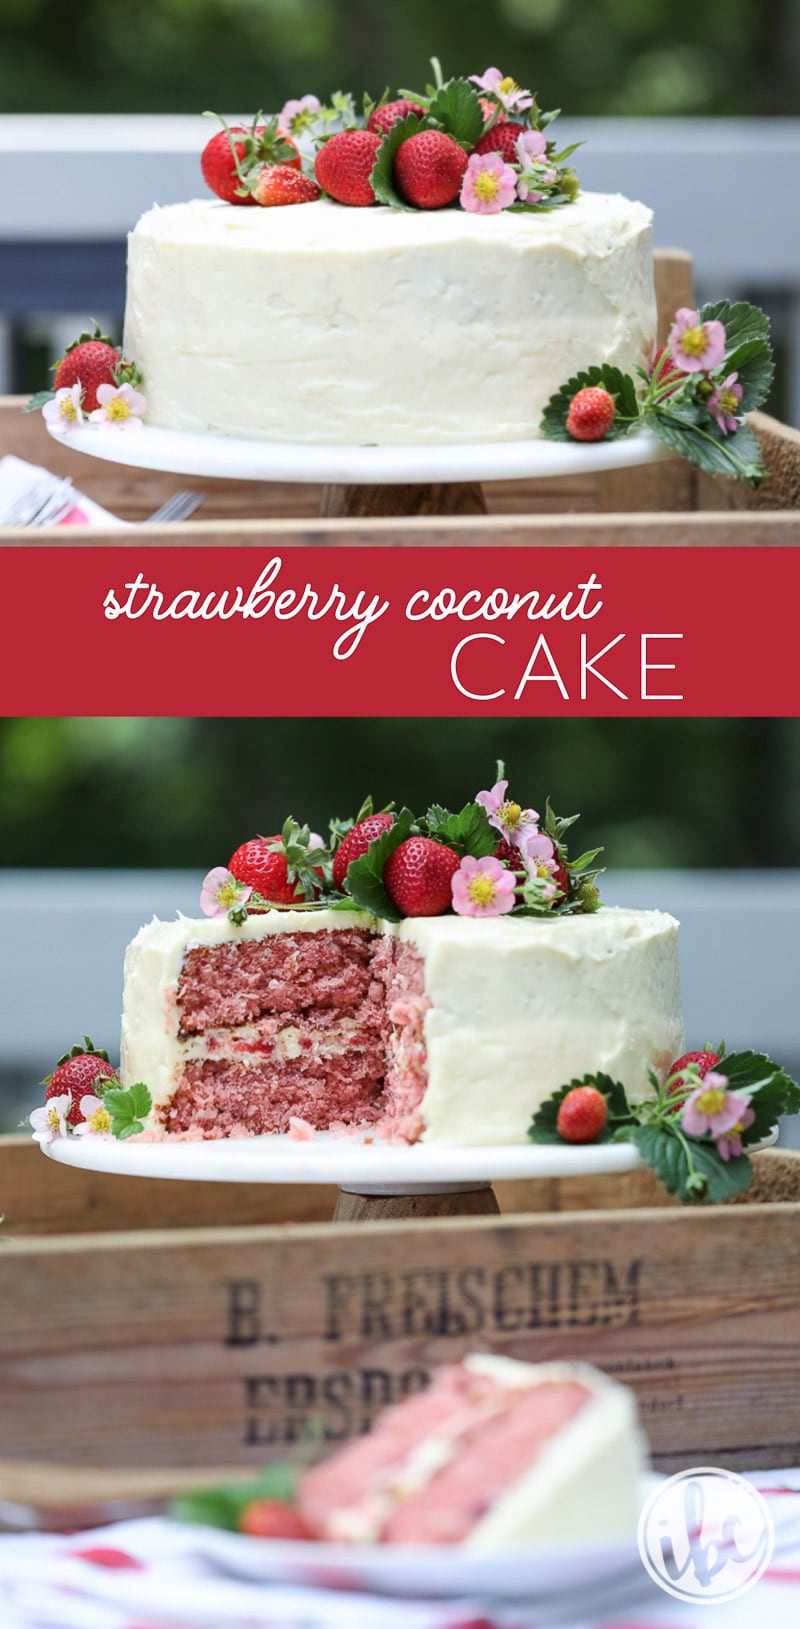 This Strawberry Coconut Cake is an easy to make dessert perfect for summer. #dessert #cake #strawberry #coconut